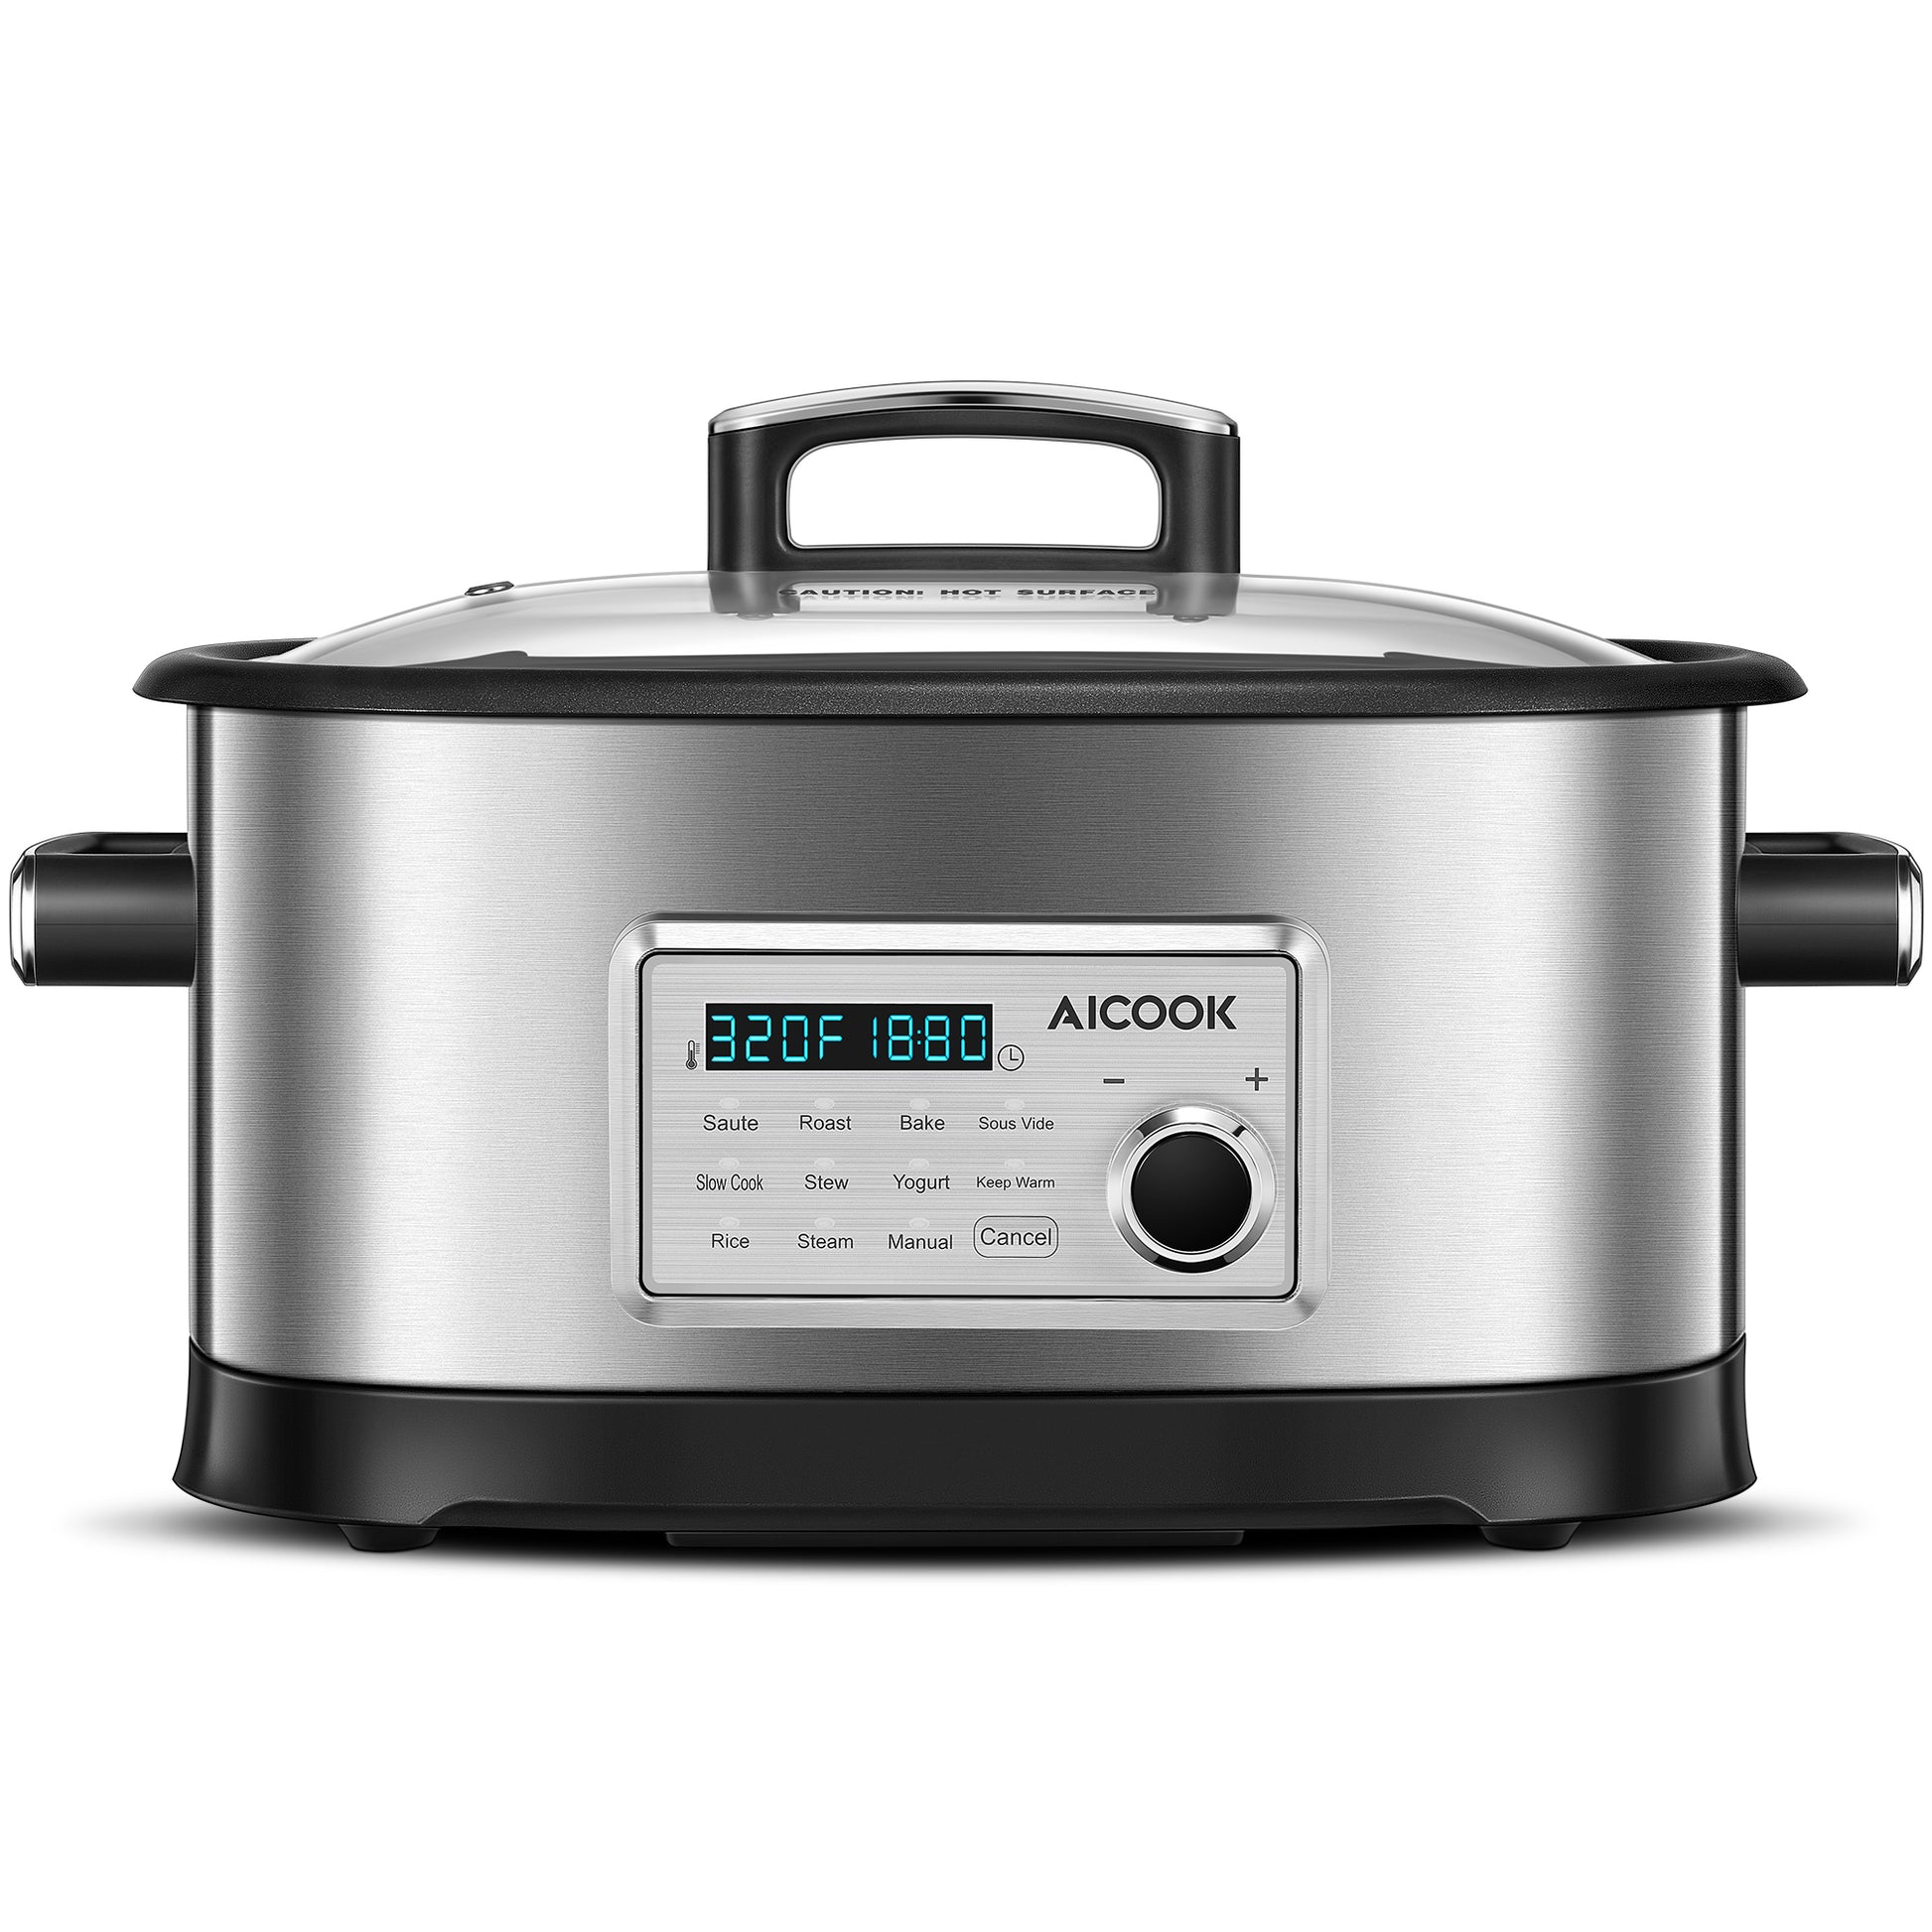 6 Quart Slow Cooker with Auto Warm Setting and Programmable Controls, Stainless Steel - As Picture